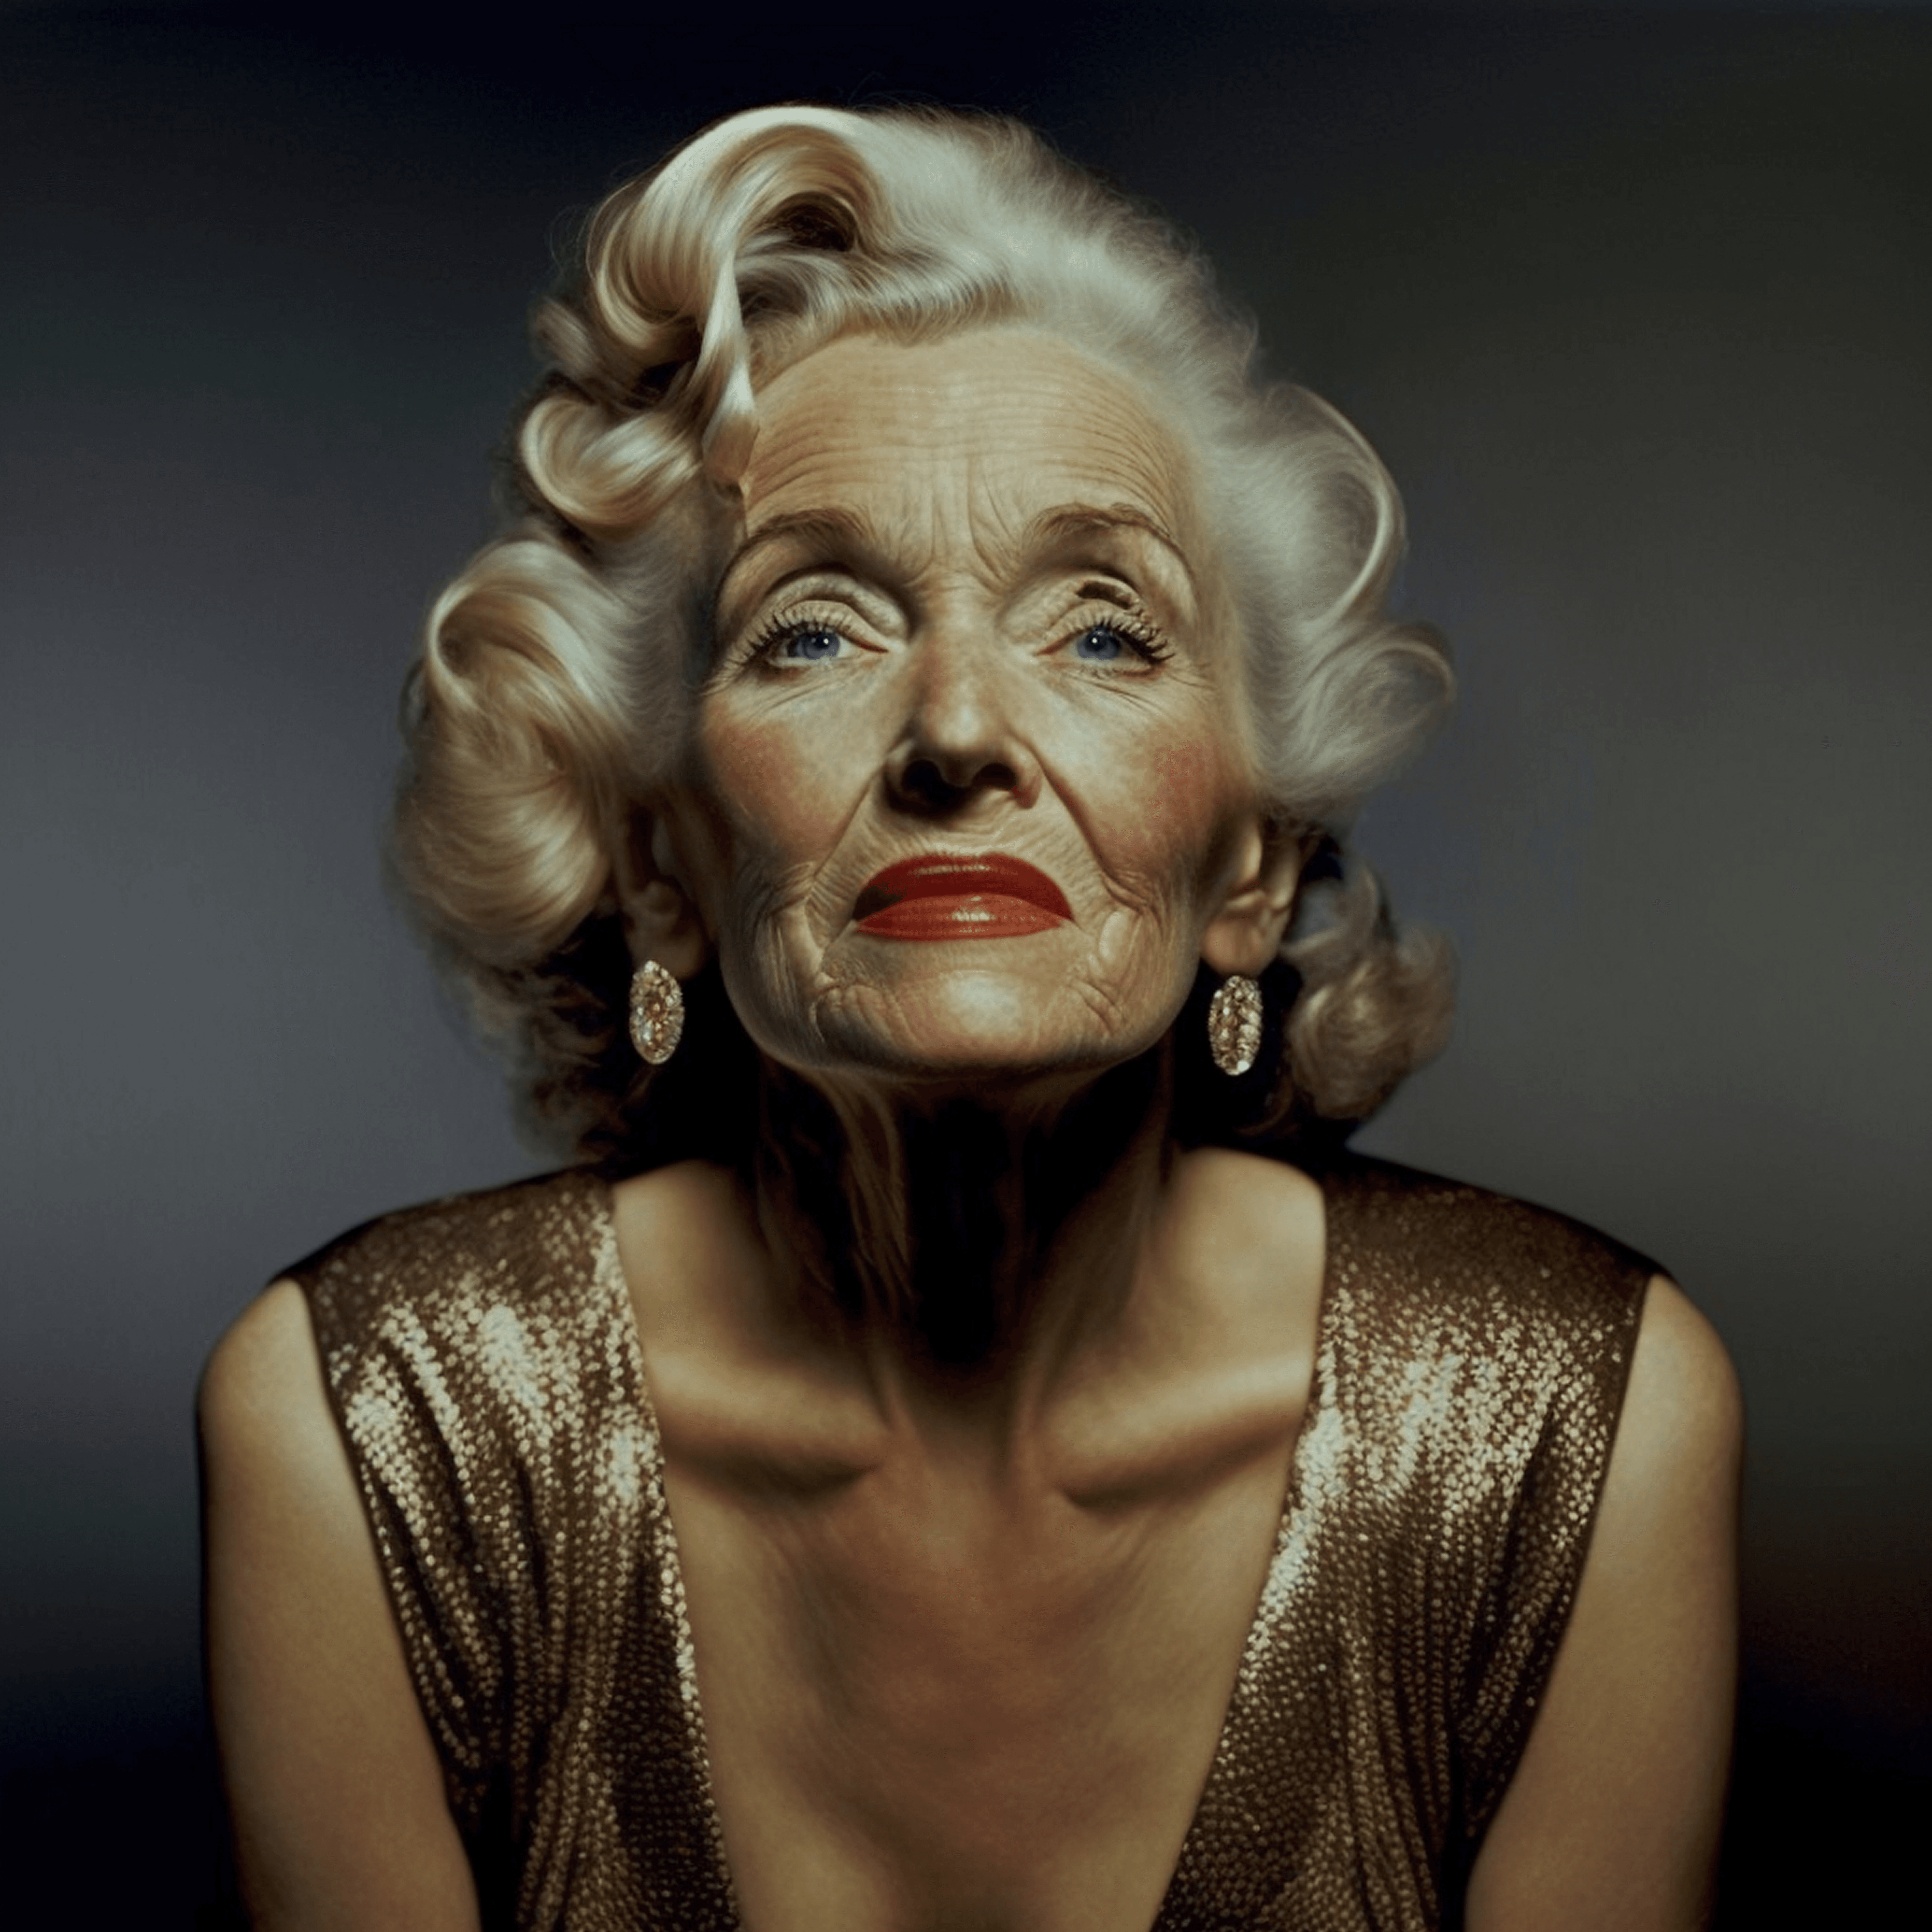 Aged Icons NFT Marilyn 97 Years Old by Sollog 1/1